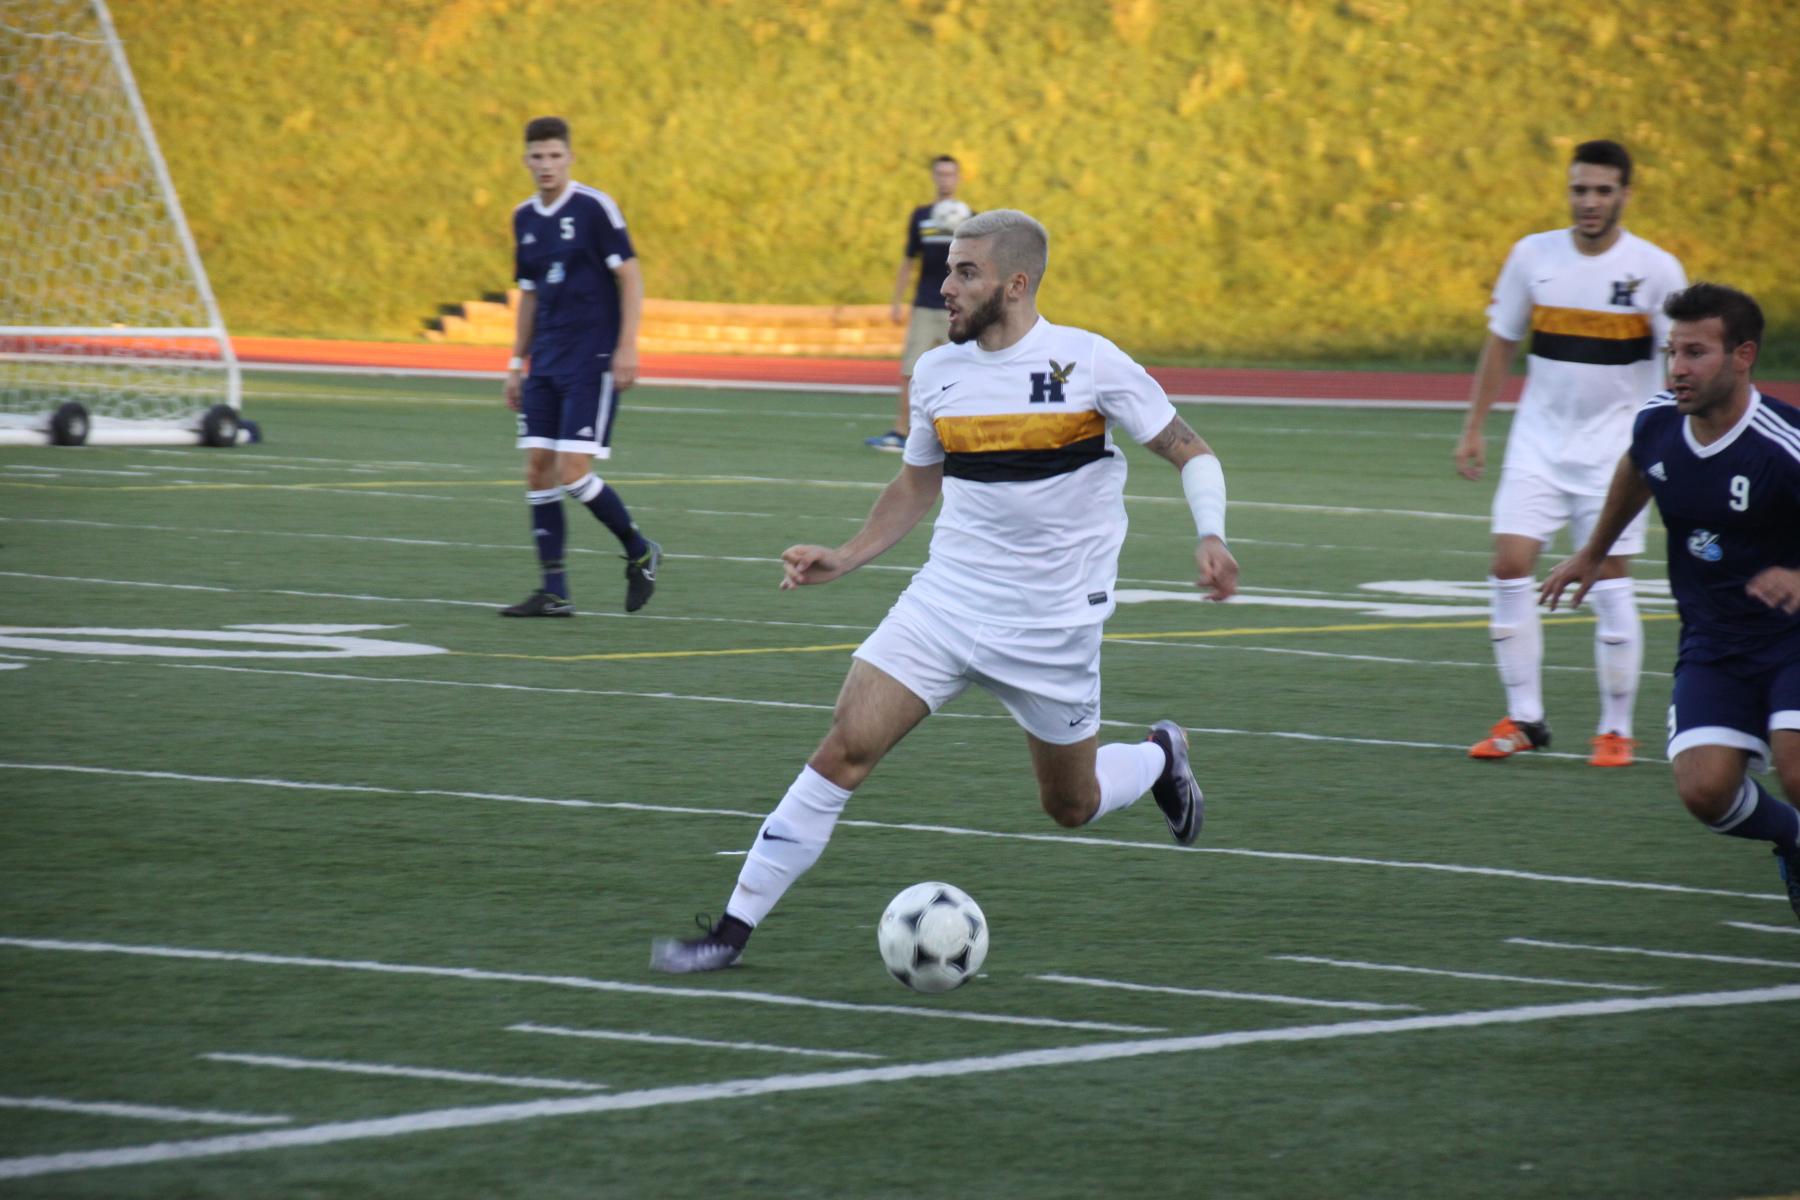 MEN'S SOCCER CONTINUES TO DOMINATE WITH 5-0 WIN